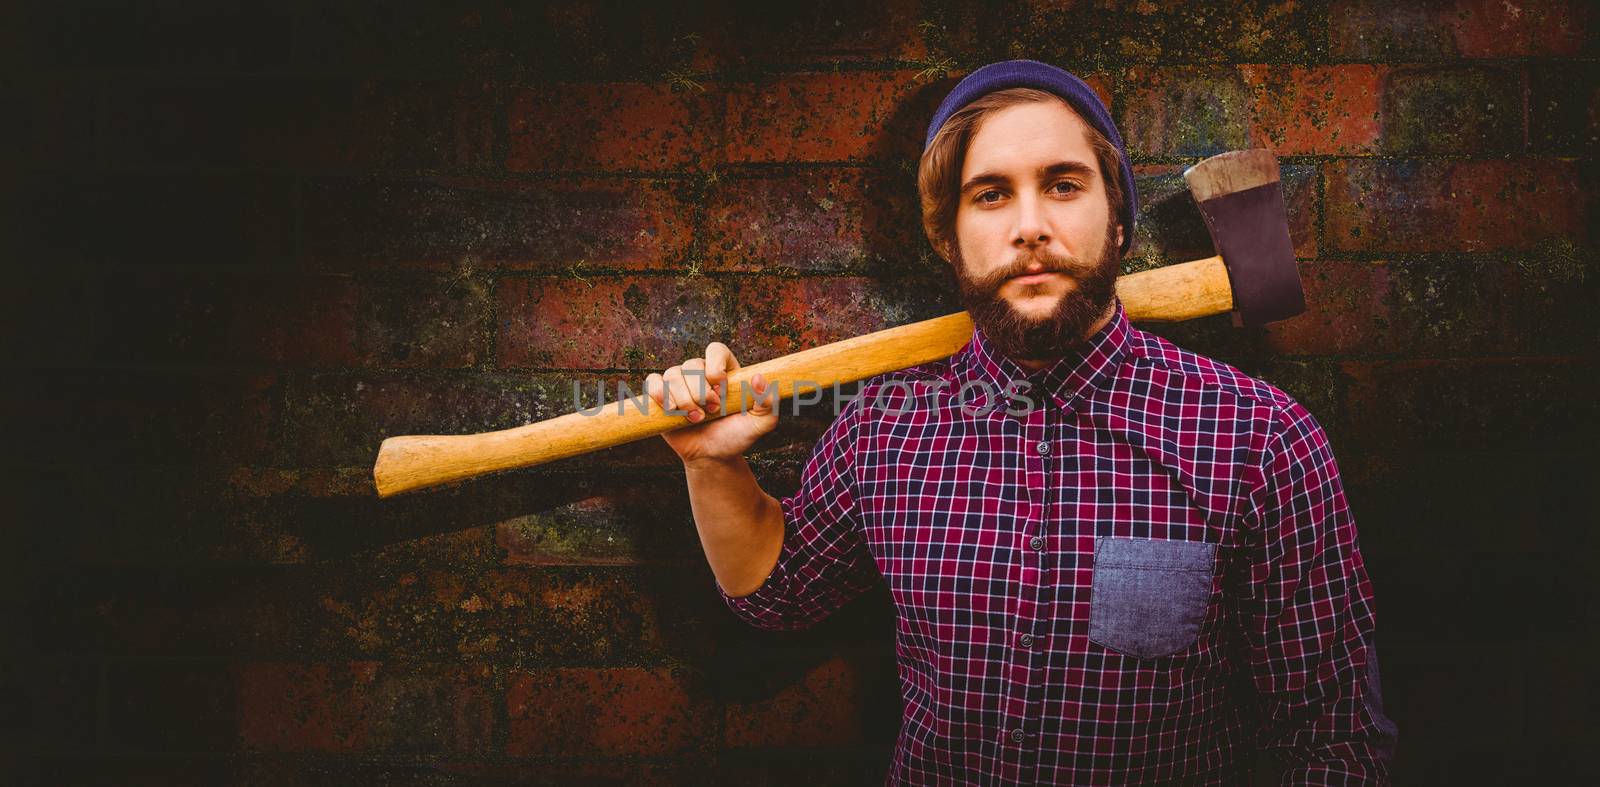 Hipster holding axe on shoulder against texture of bricks wall